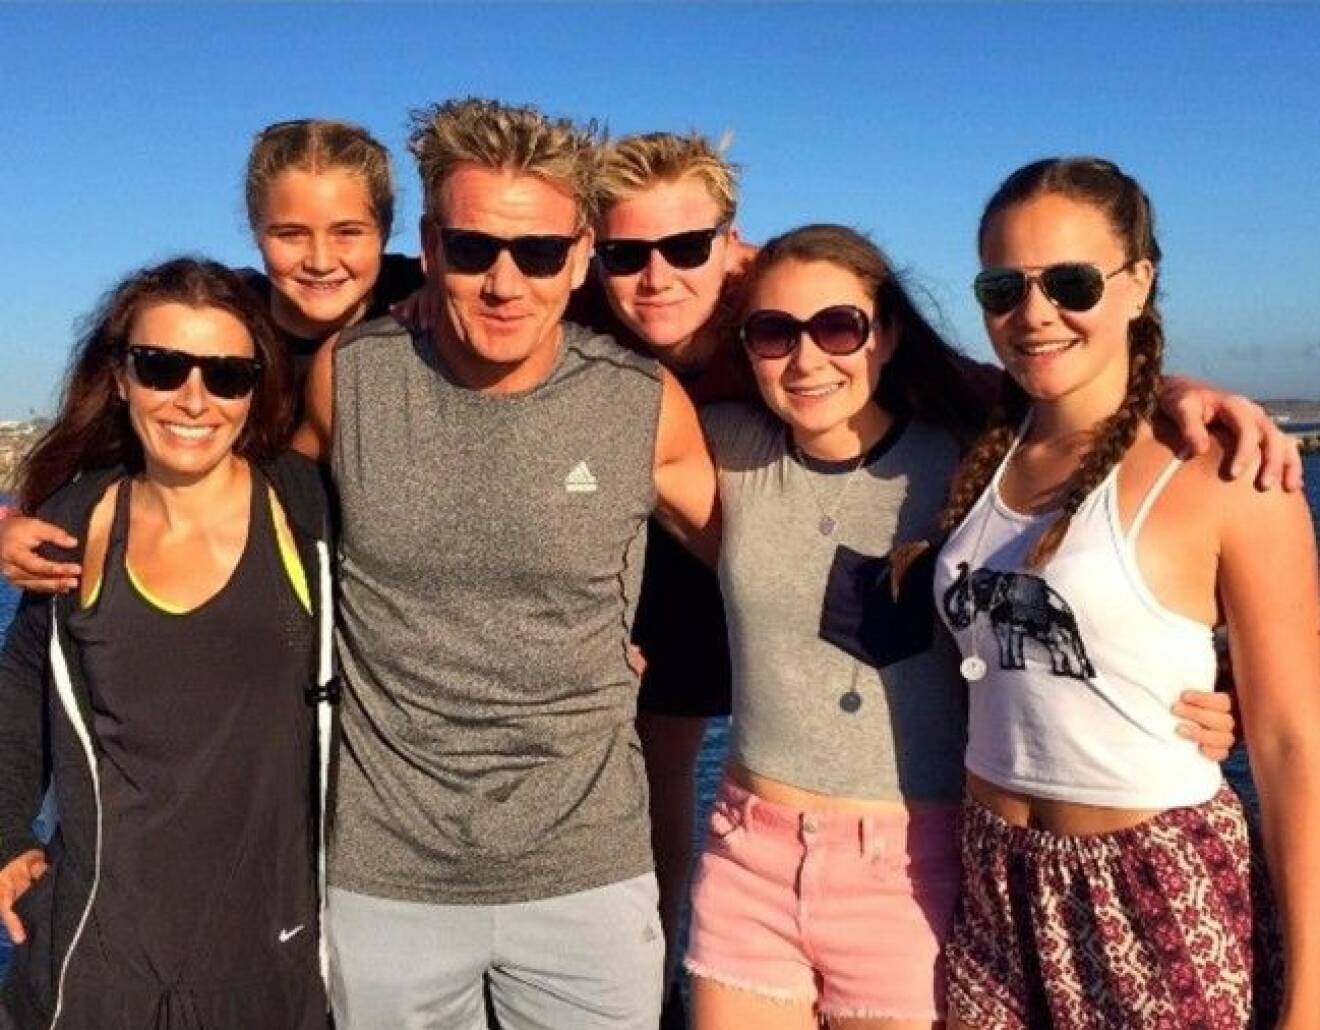 16-8-2014 Gordon Ramsay writes The start of @tanaramsay 40th birthday week ! Looking gorgeous Pictured: Gordon Ramsay and family Supplied: Planet Photo Code: 4066 DISTR. STELLA PICTURES Photo: Planet Photo Code: 4066 COPYRIGHT STELLA PICTURES